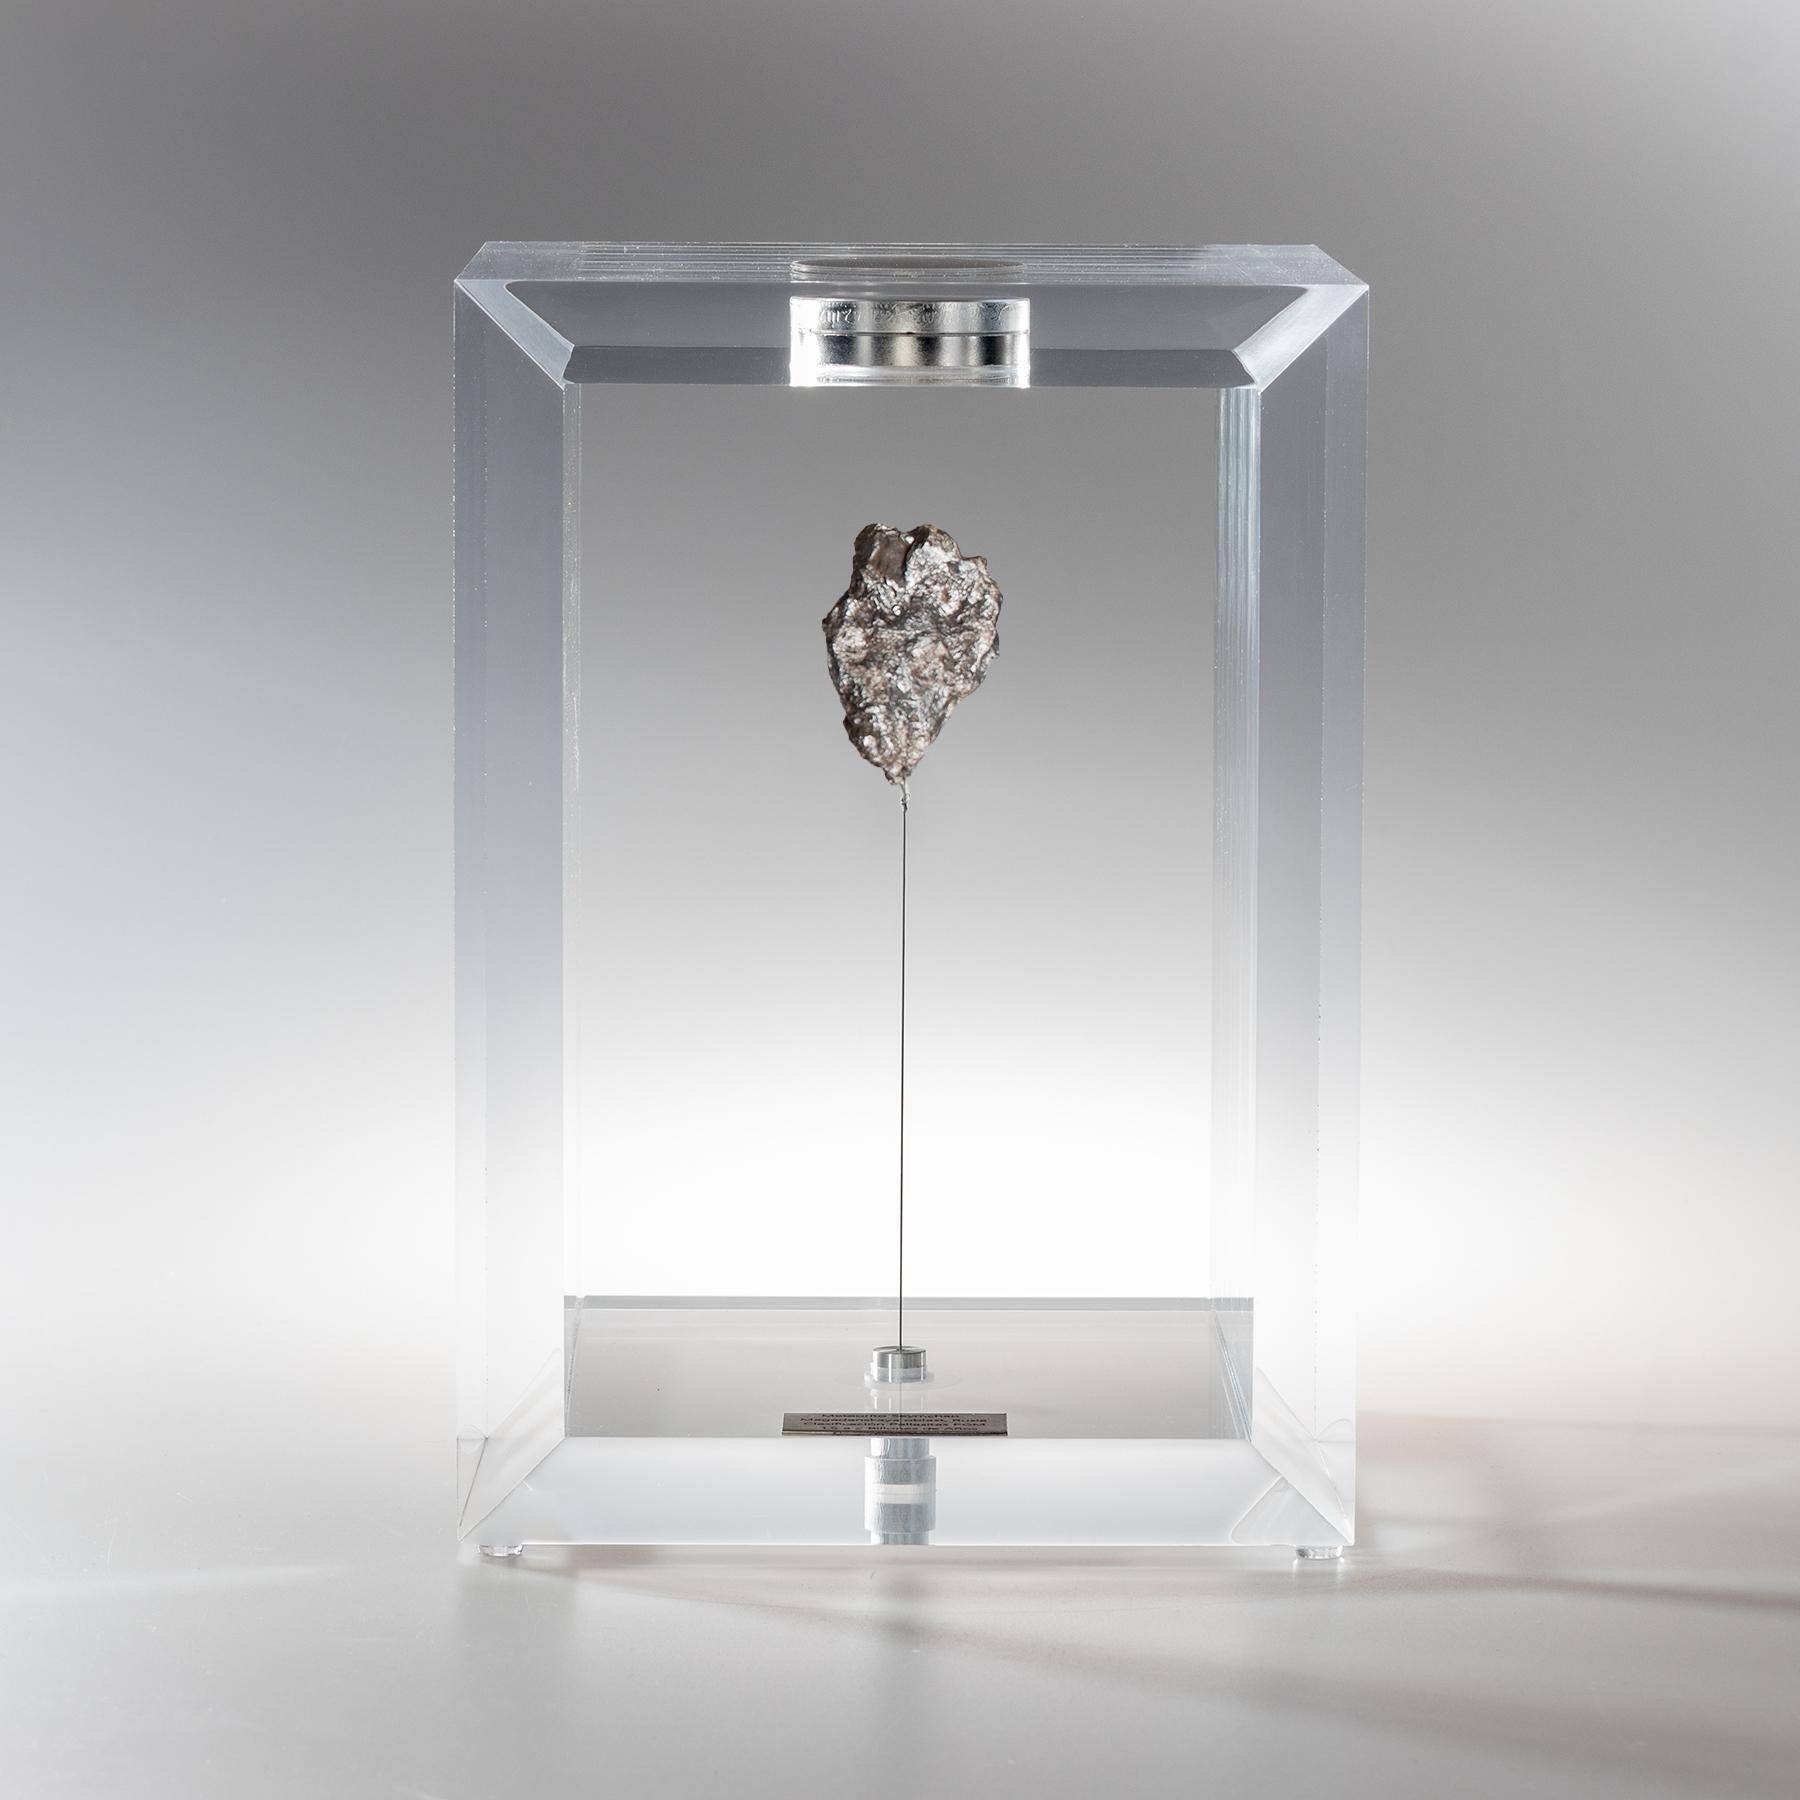 The “Space Box” was designed by Ernesto Duran, as a creative way to enhance the uniqueness of meteorites and could also be use as a decorative piece. Its an acrylic box with a magnet on top and a steel string pulling the meteorite straight